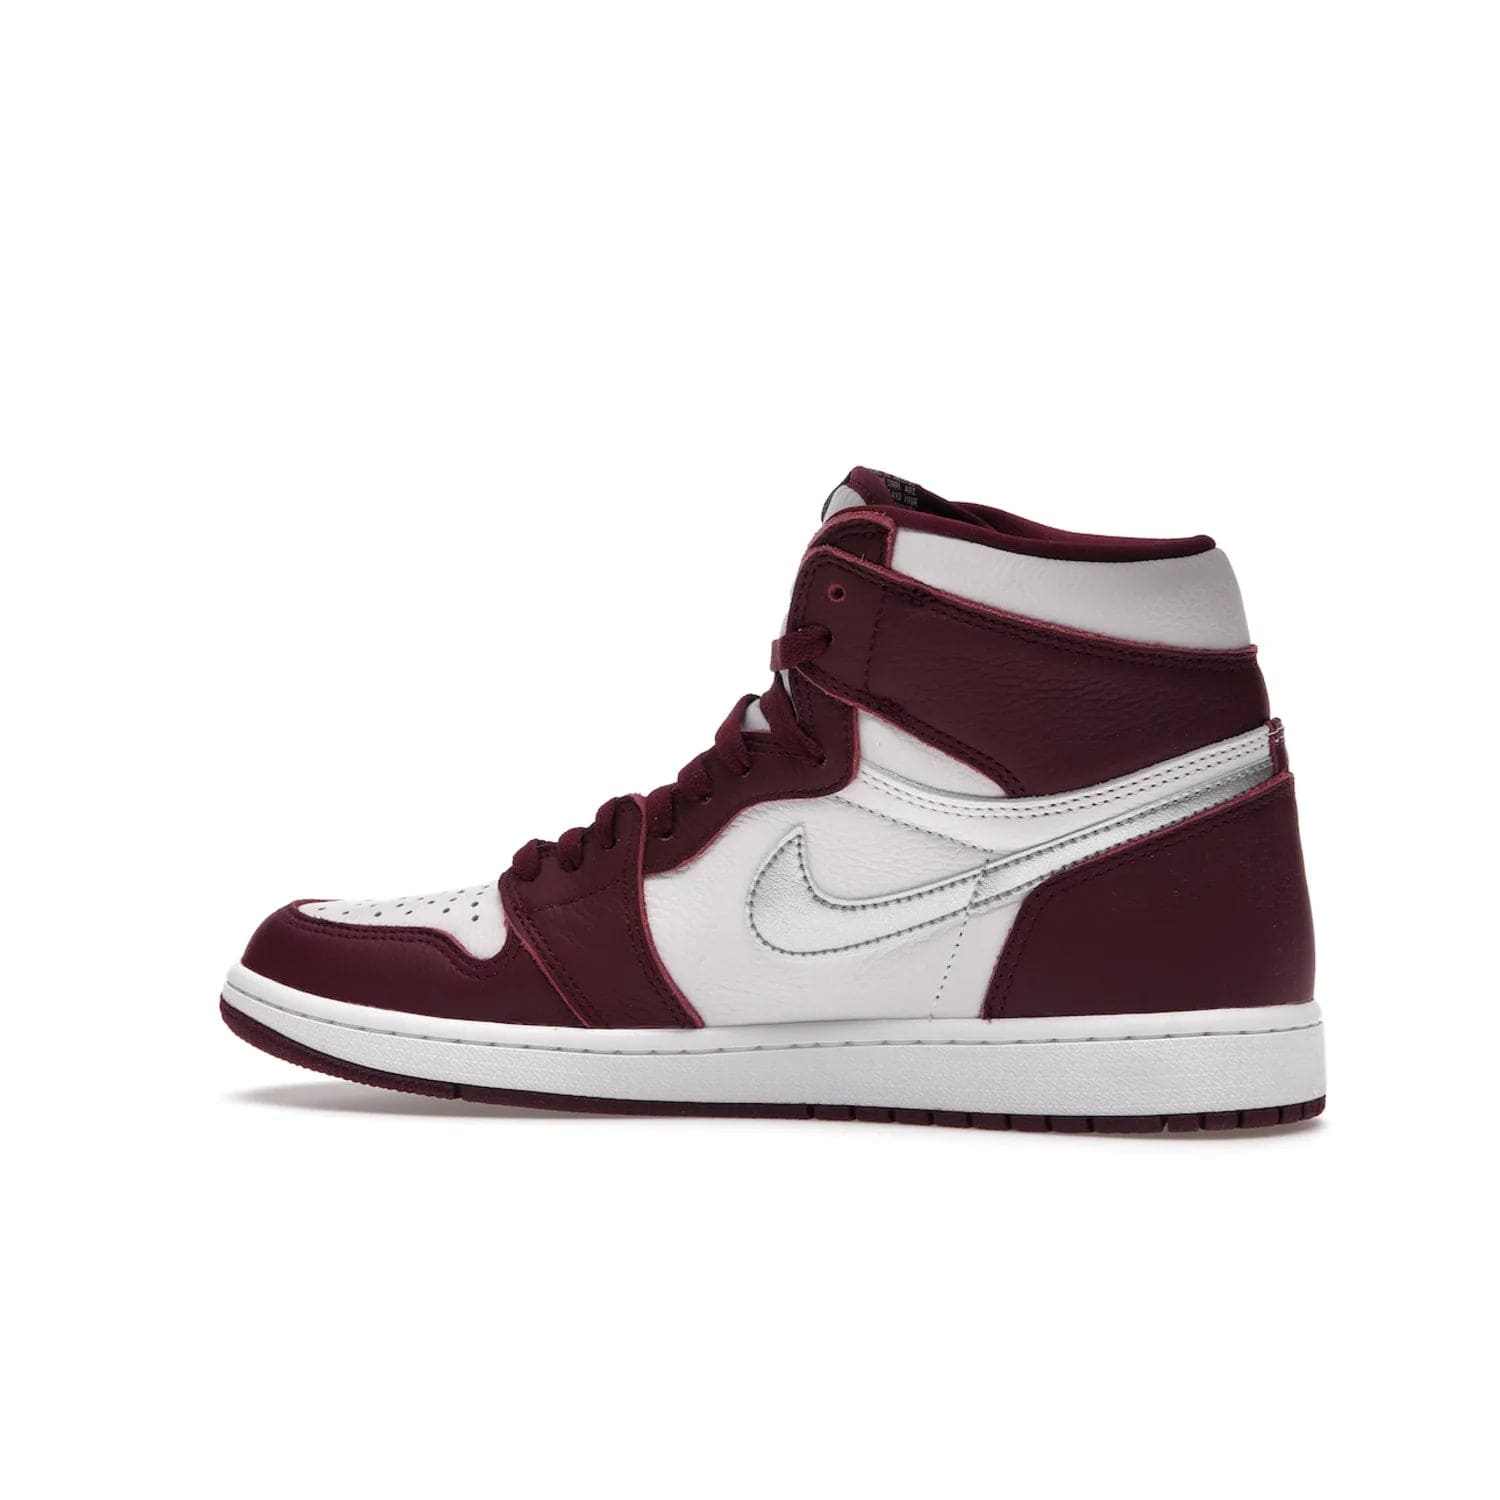 Jordan 1 Retro High OG Bordeaux - Image 21 - Only at www.BallersClubKickz.com - Shop the classic Air Jordan 1 High Bordeaux with a modern high-top cut. The timeless Bordeaux and White-Metallic Silver colorway, releasing Nov 20, 2021, is perfect for practice or a night out.